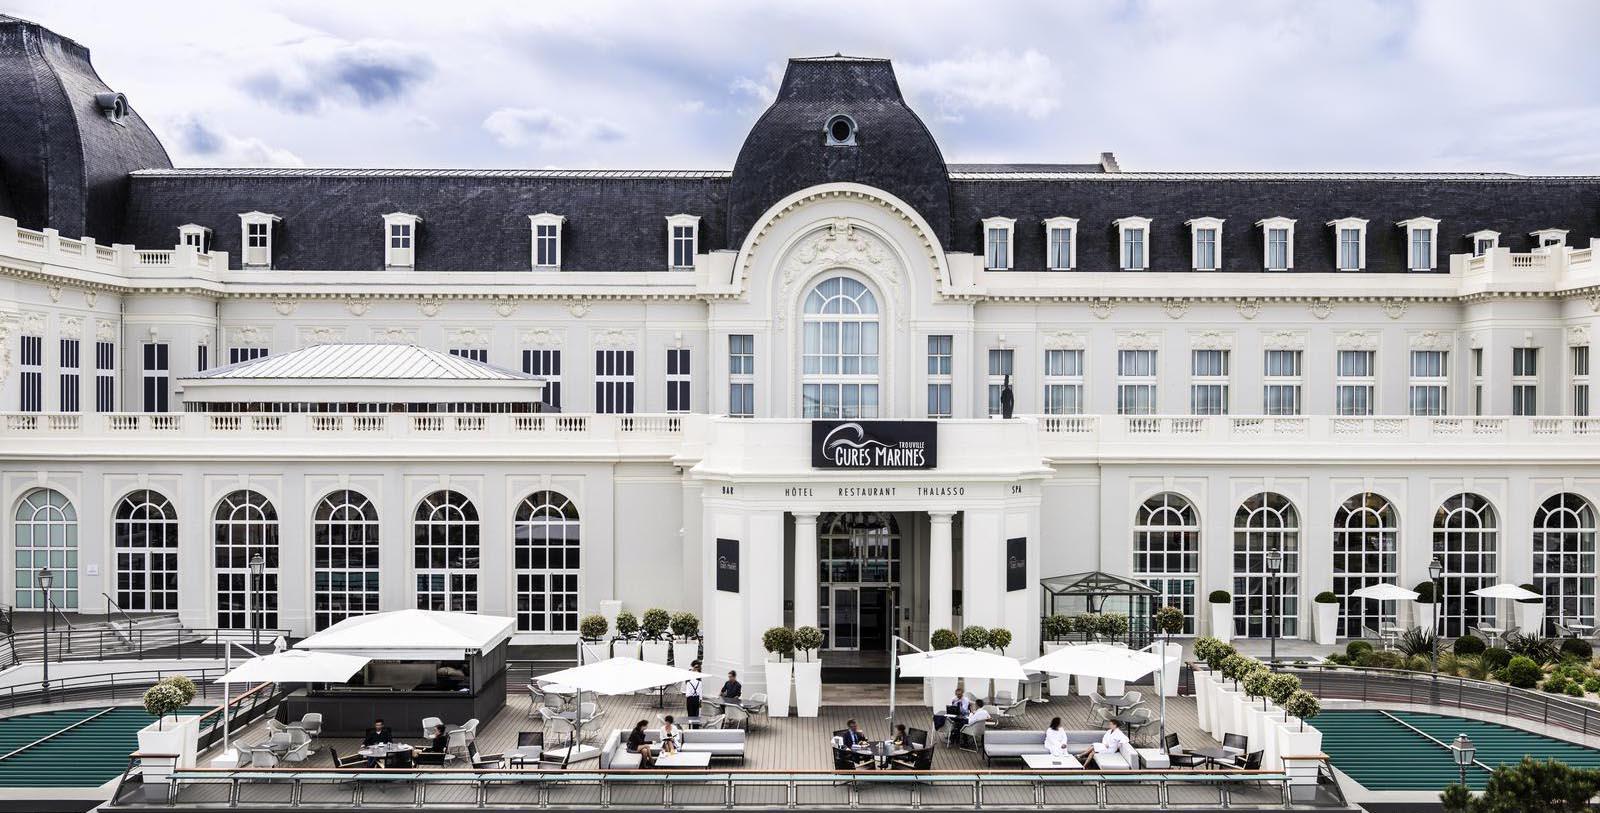 Image of hotel exterior Cures Marines Trouville Hôtel Thalasso & Spa-MGallery by Sofitel, 1912, Member of Historic Hotels Worldwide, Trouville-sur-Mer, Overview Video